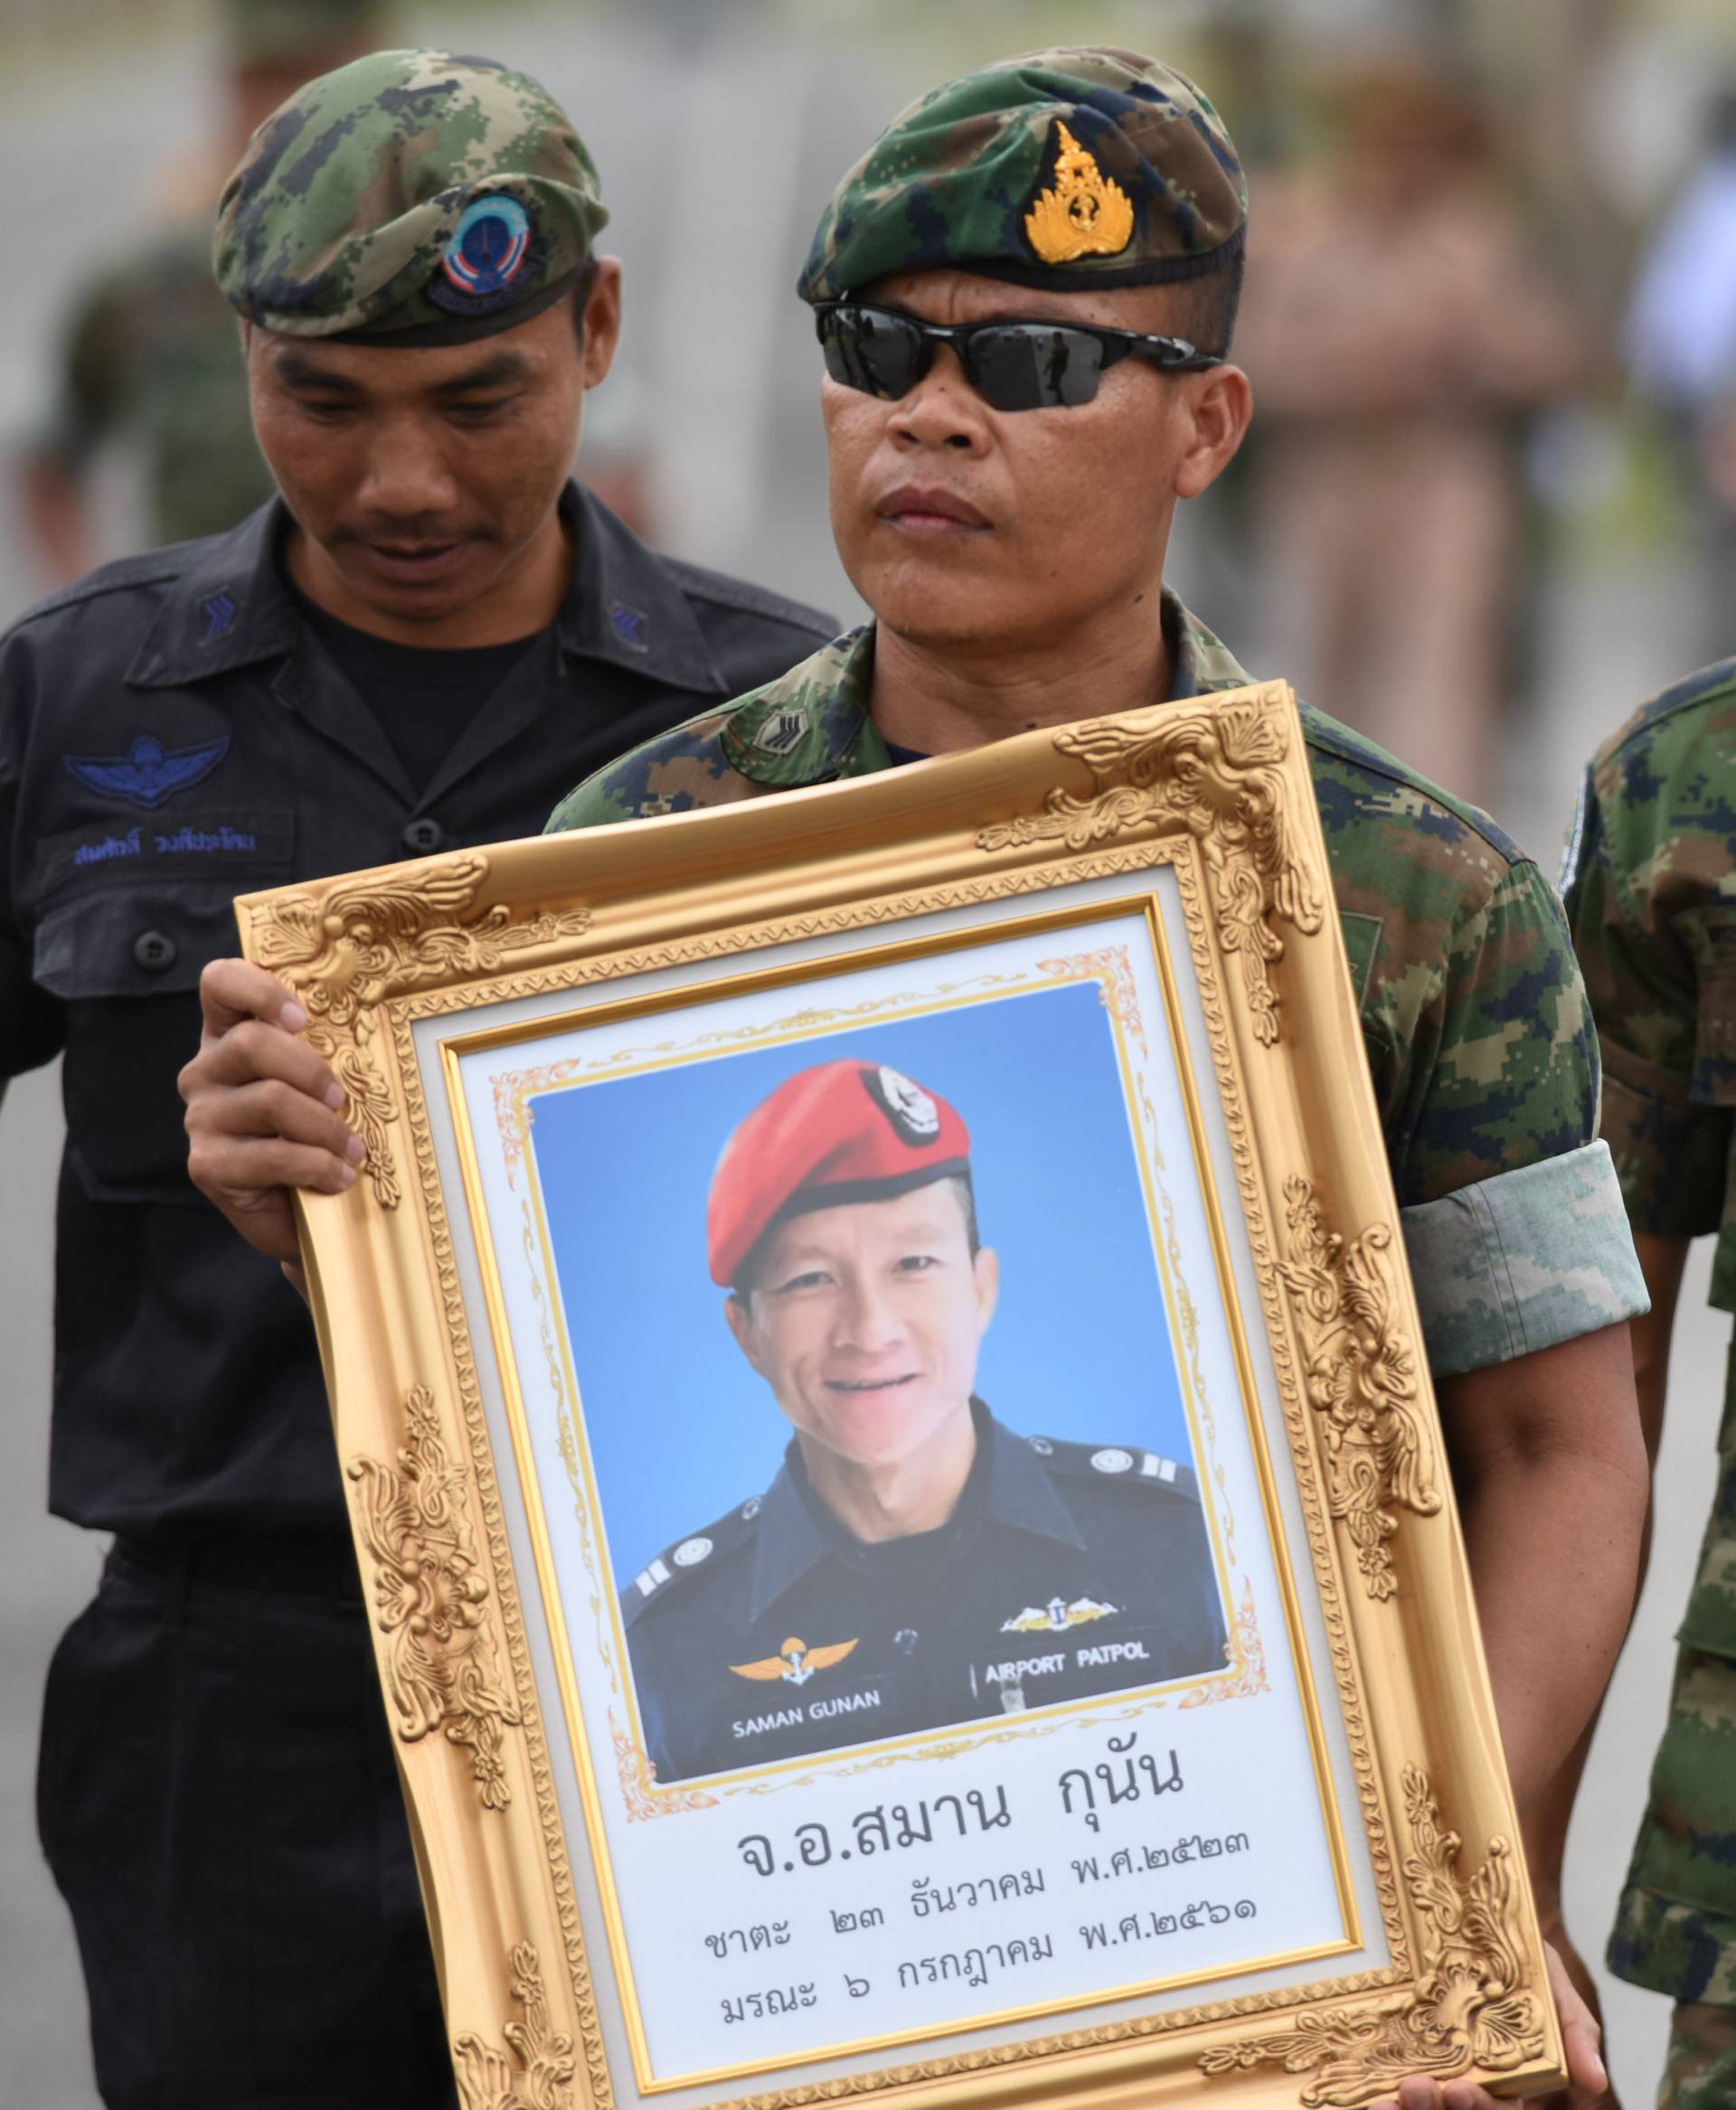 An honour guard hold up a picture of Samarn Poonan, 38, a former member of Thailand's elite navy SEAL unit who died working to save 12 boys and their soccer coach trapped inside a flooded cave as family members weep at a airport, in Rayong province